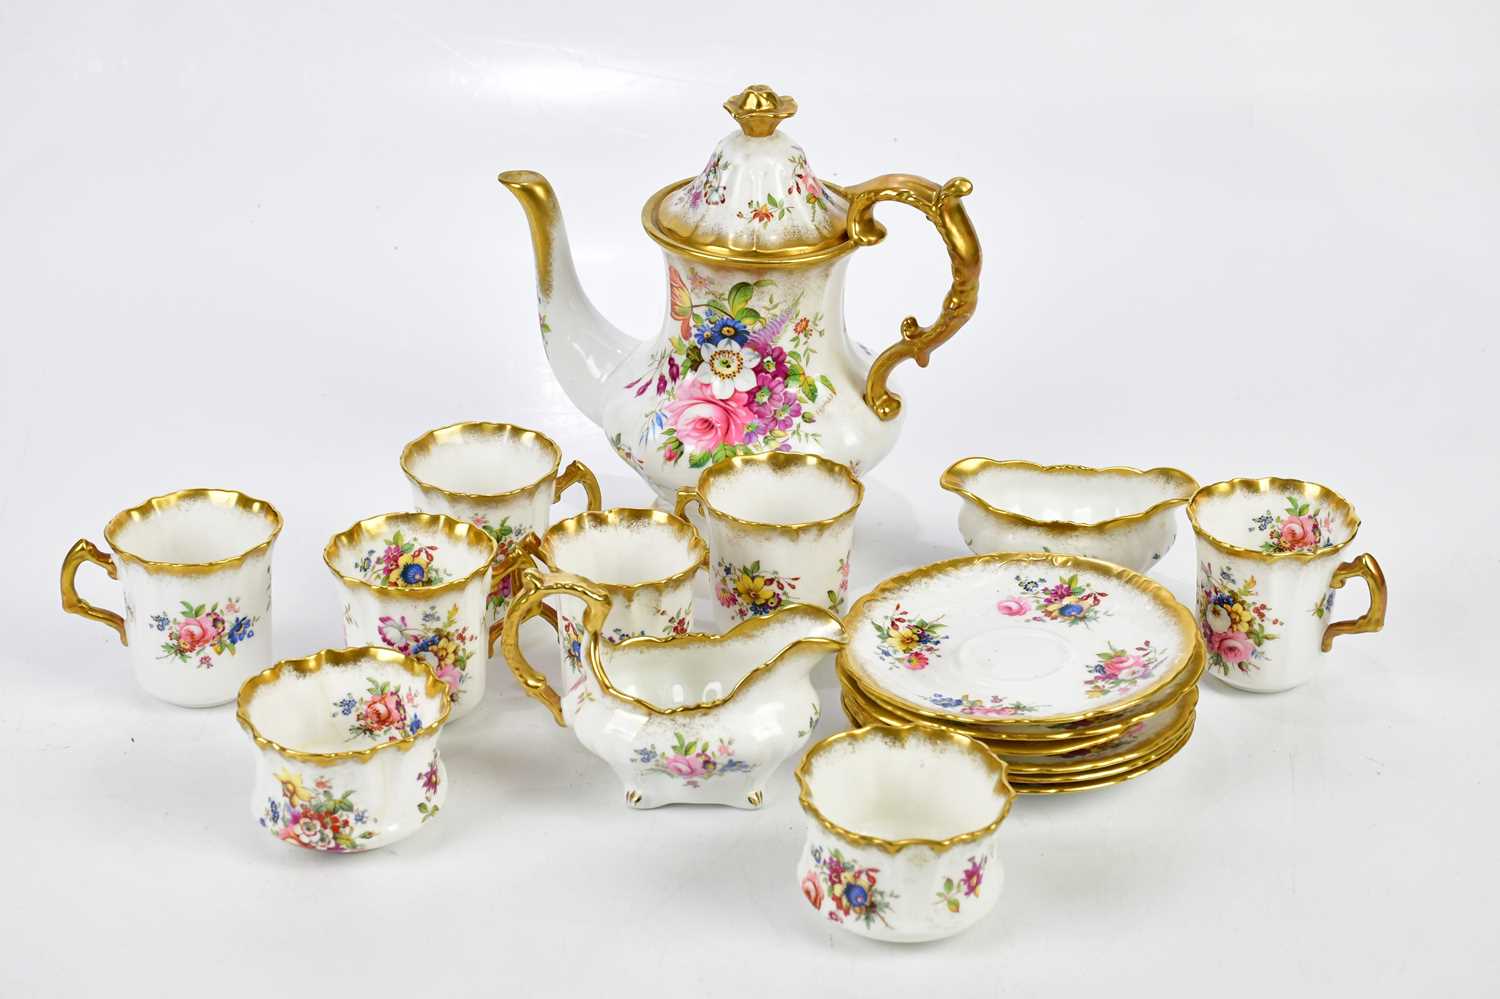 HAMMERSLEY; a six setting service in the 'Lady Patricia' pattern including teapot (18). Condition